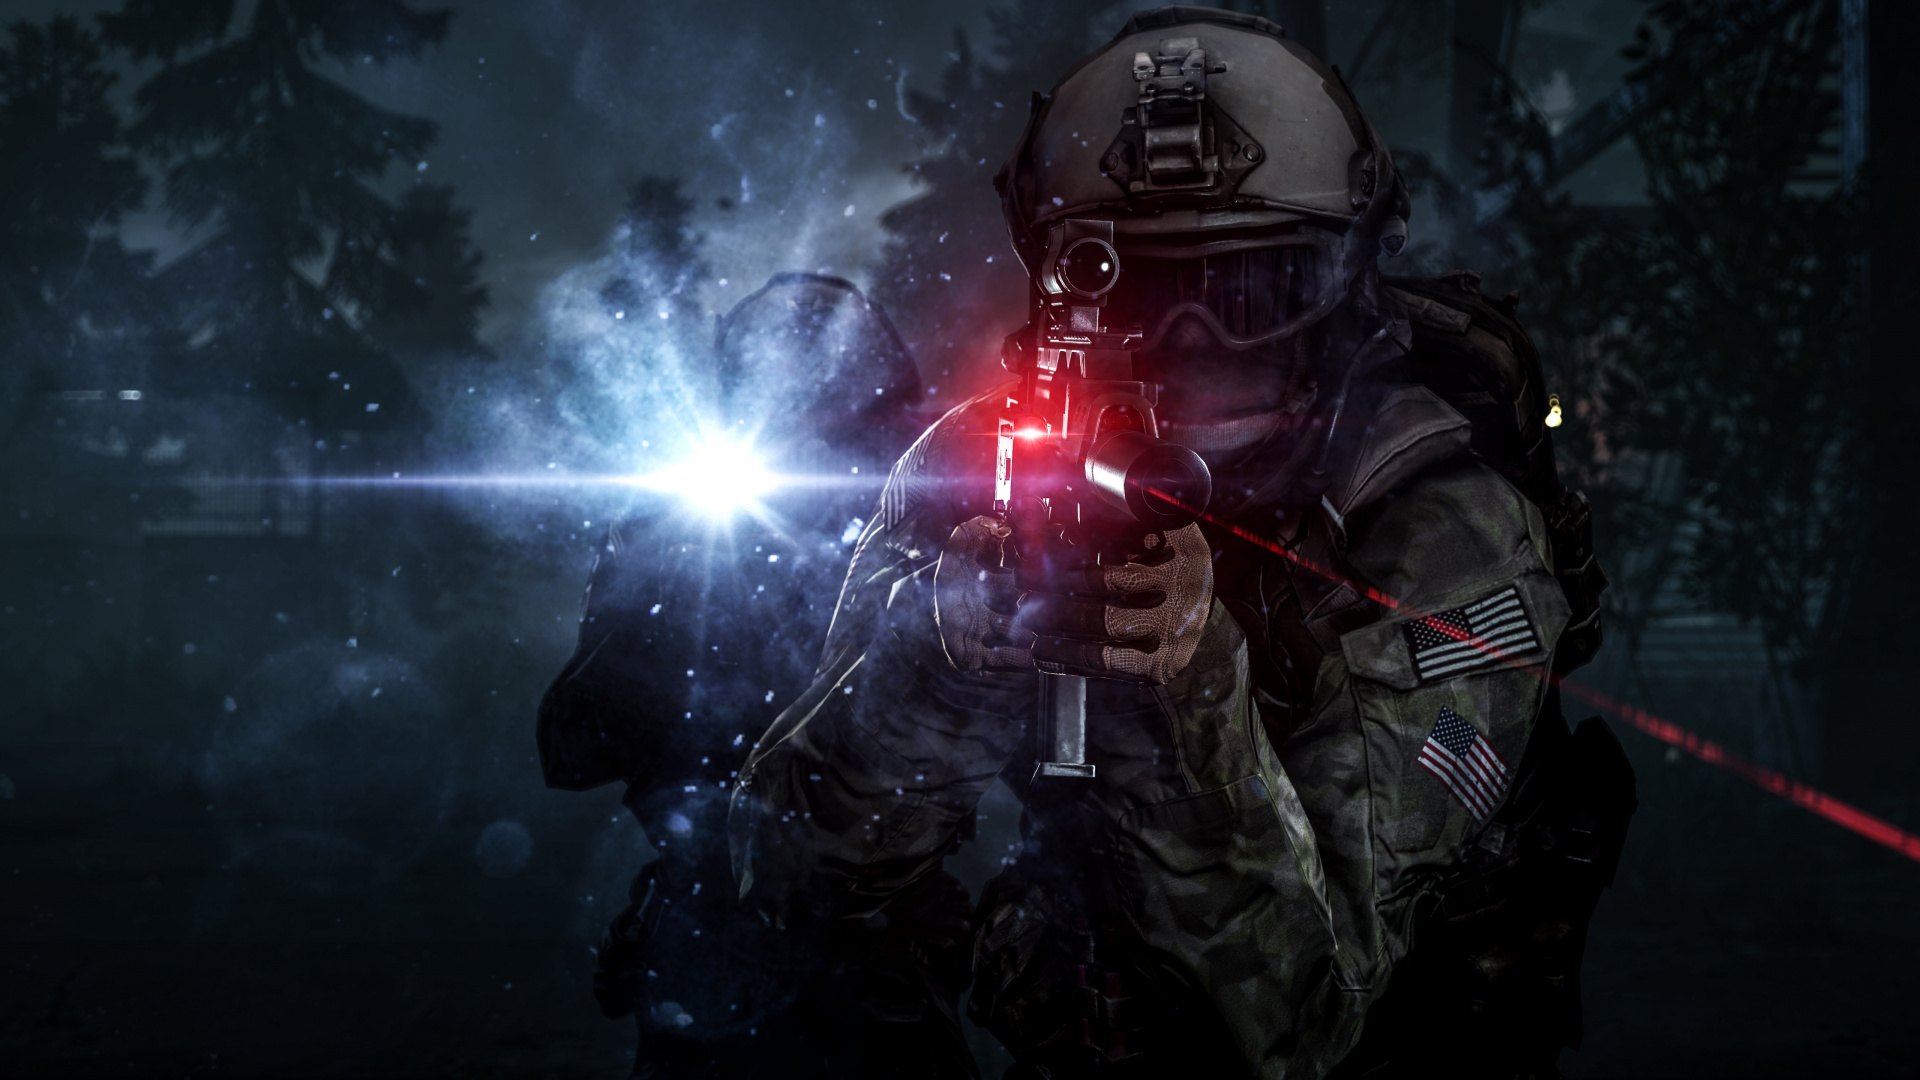 Jeu Pc, Obscurité, Espace, Android, Battlefield 4. Wallpaper in 1920x1080 Resolution